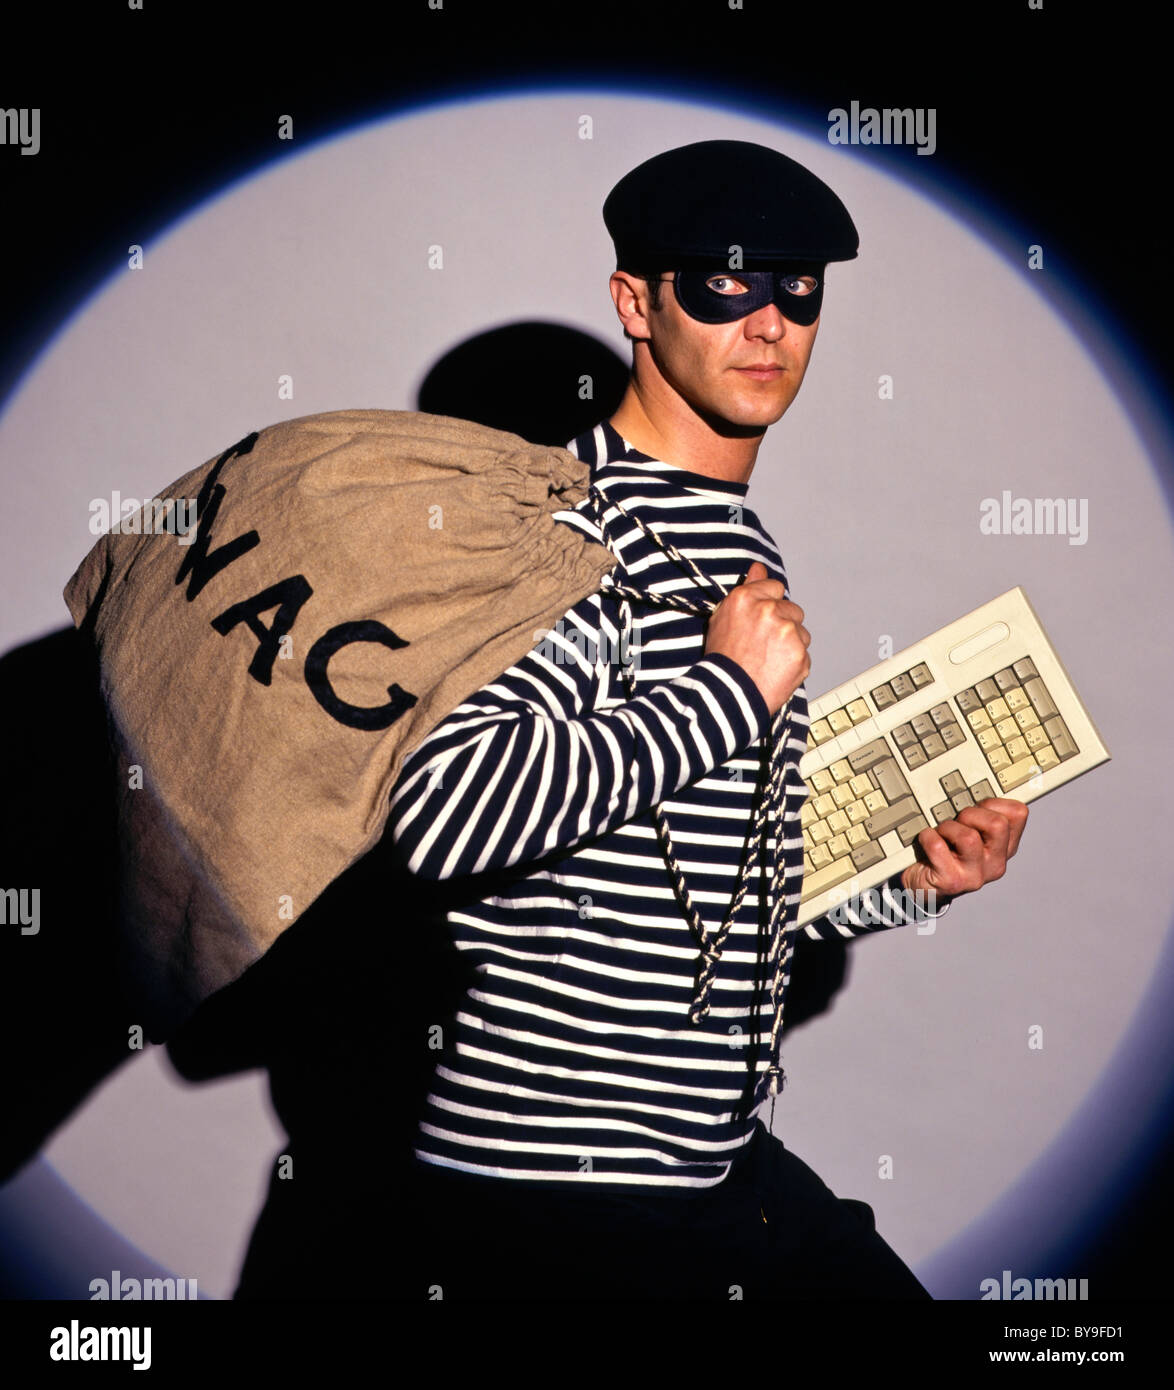 Burglar in traditional costume with swag bag and keyboard stealing a computer Stock Photo